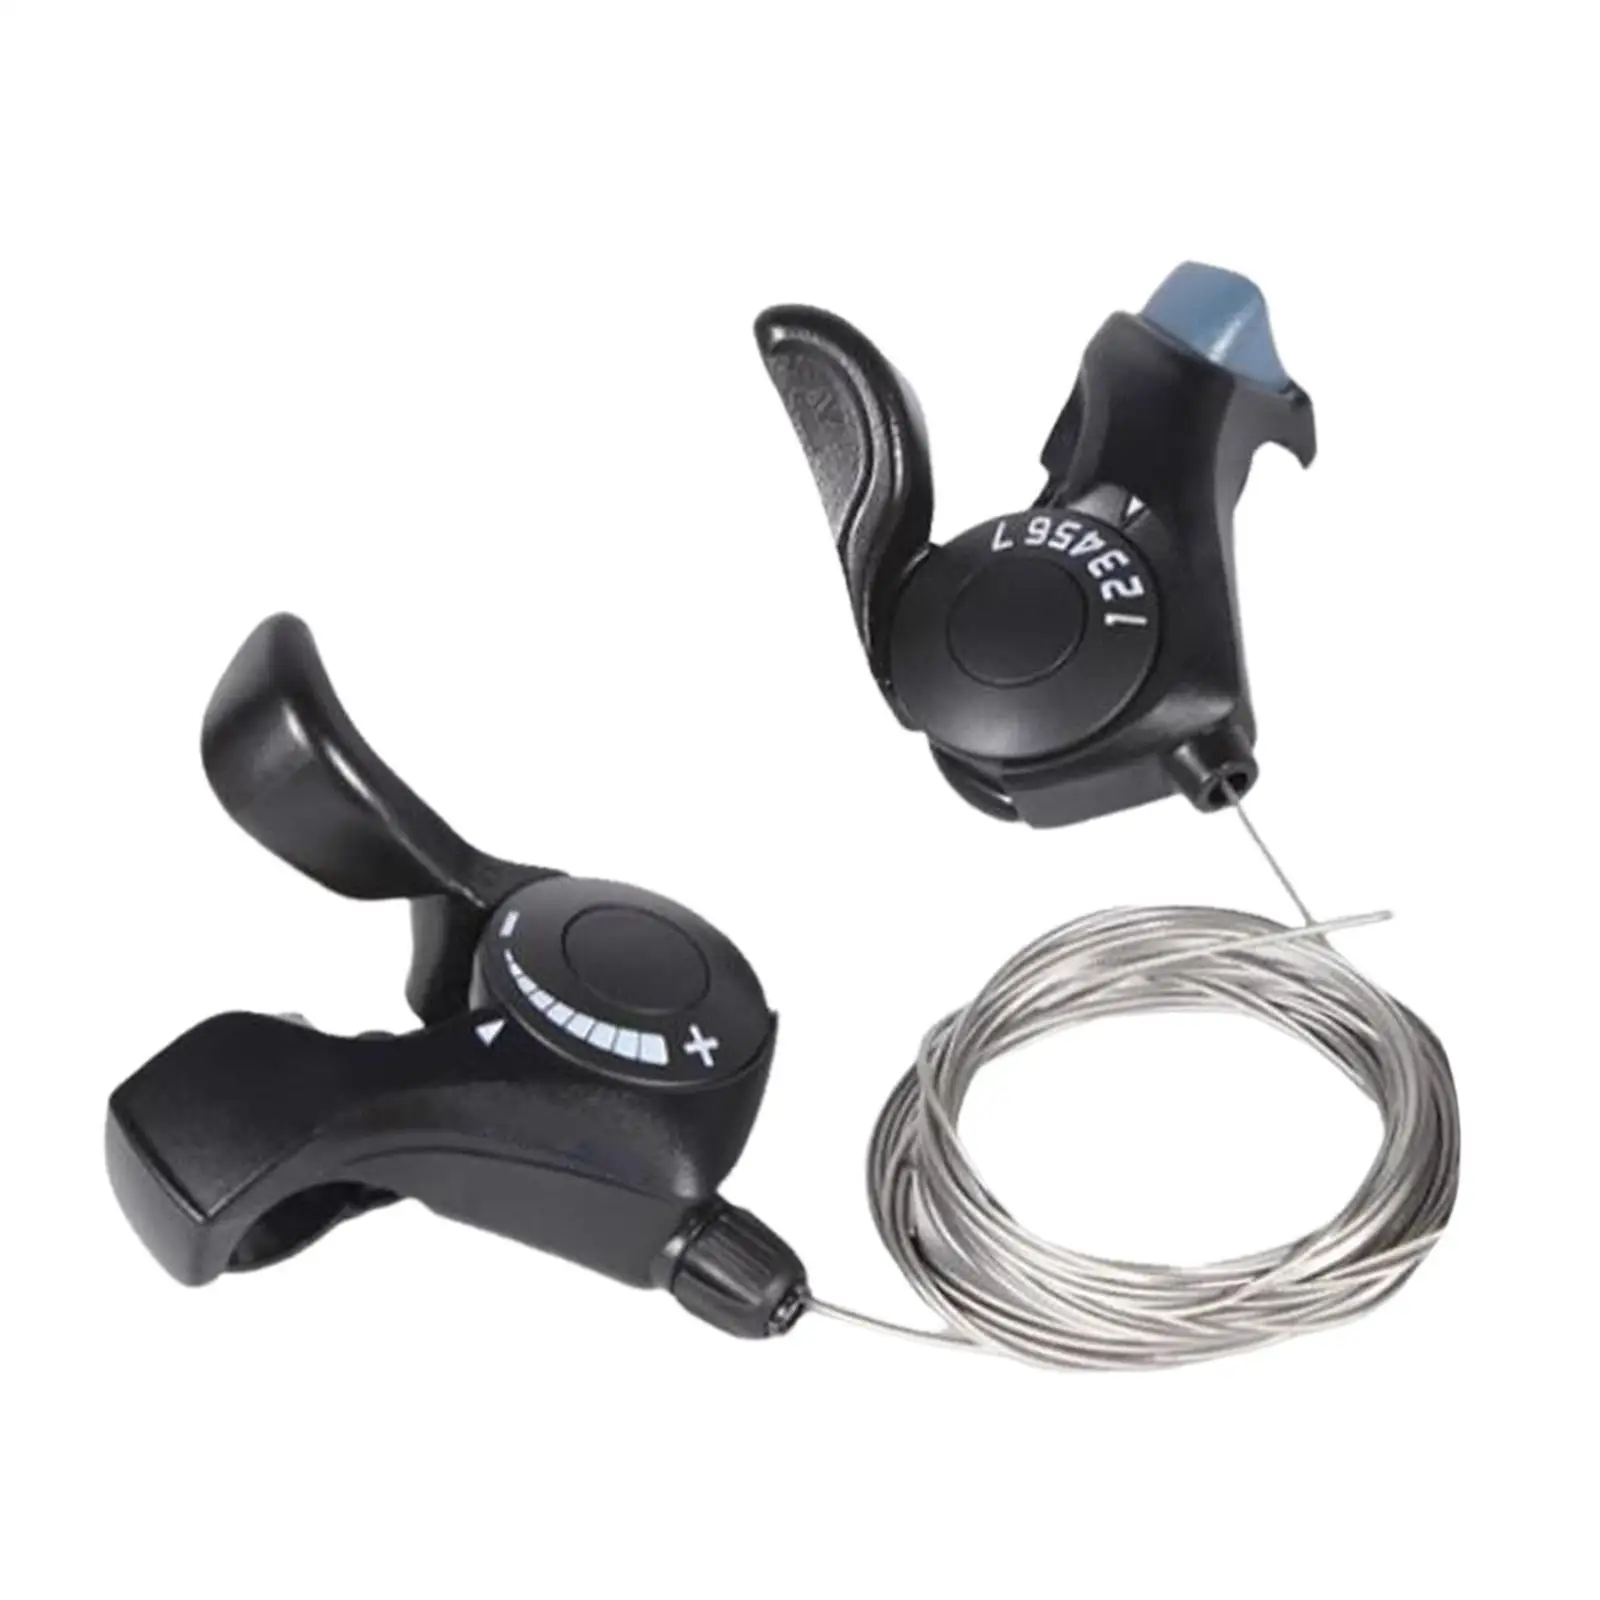 Bike Shifters Set with Cables Bicycle Lever Shifter Set Bicycle Shifting Lever for Road Bike Mountain Bike Outdoor Accessories